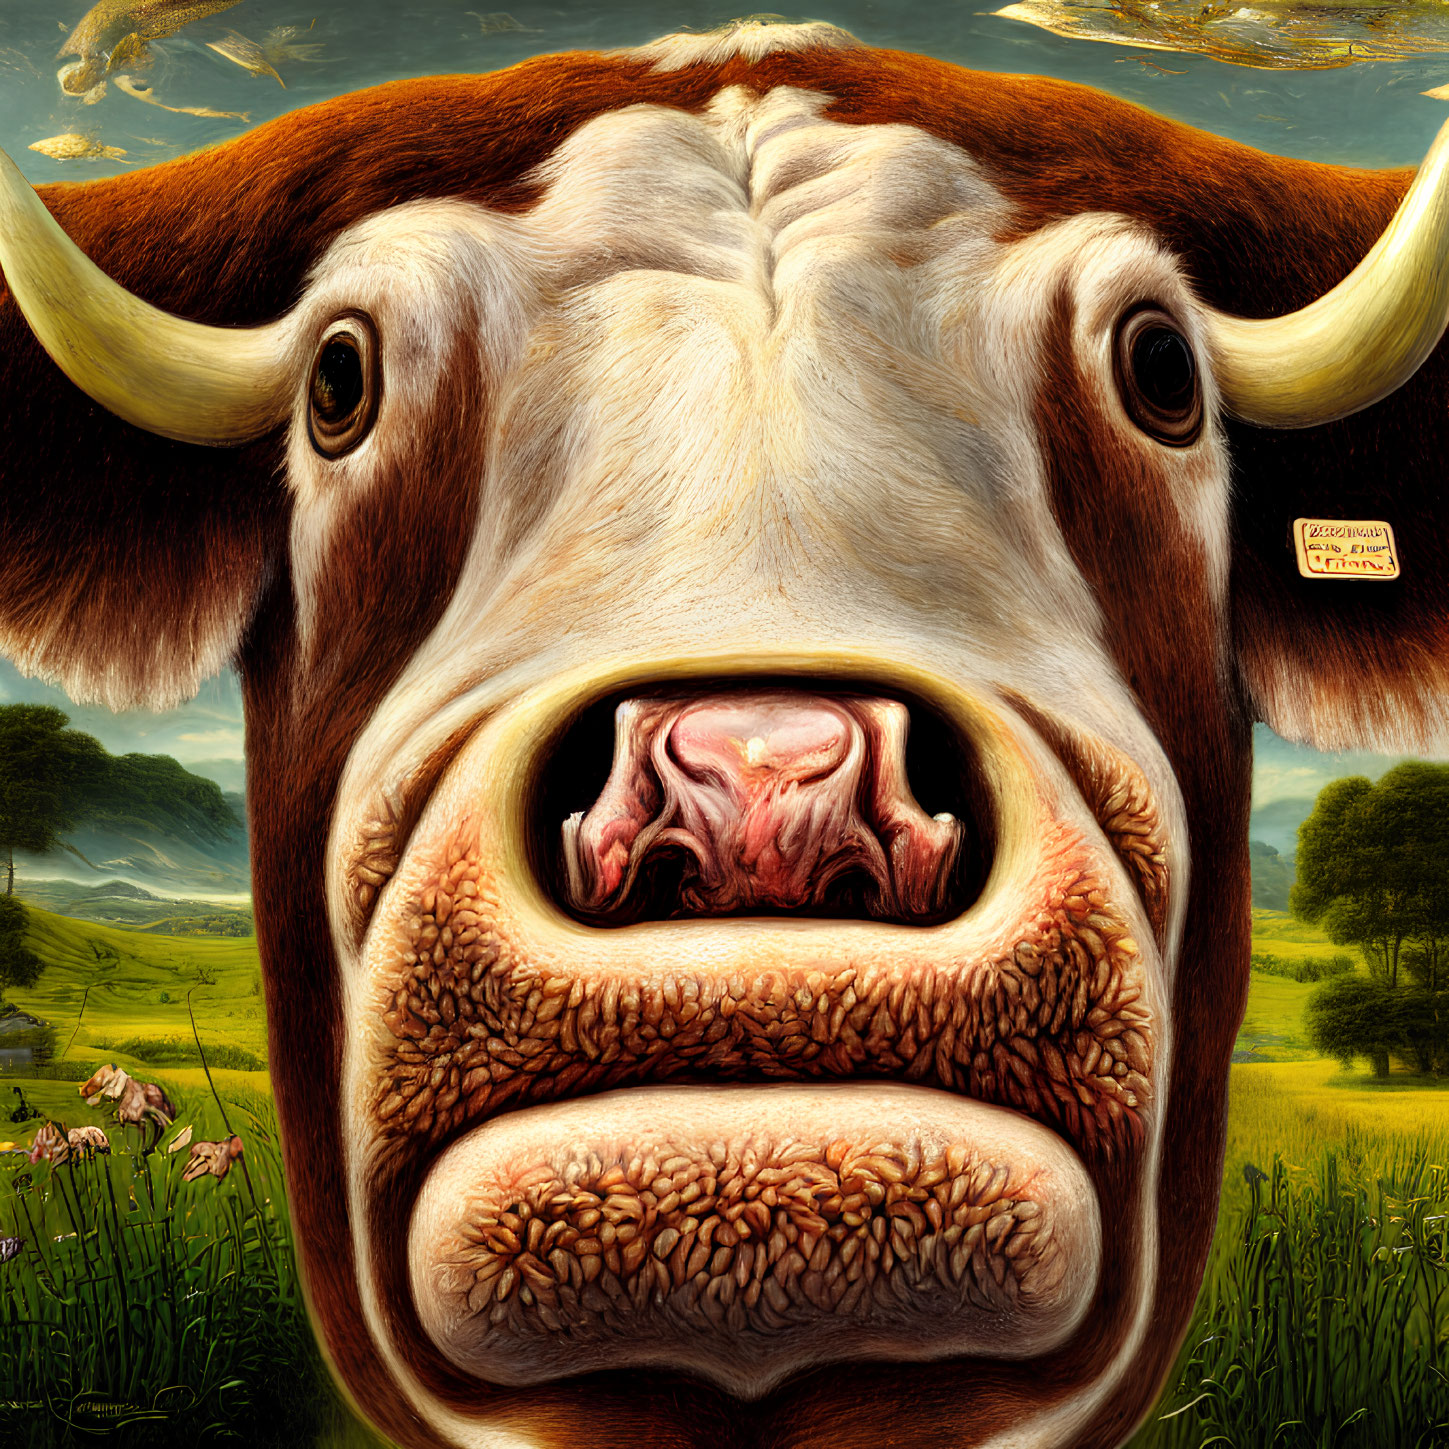 Detailed hyperrealistic cow painting with "Certified Angus Beef" logo in pastoral landscape